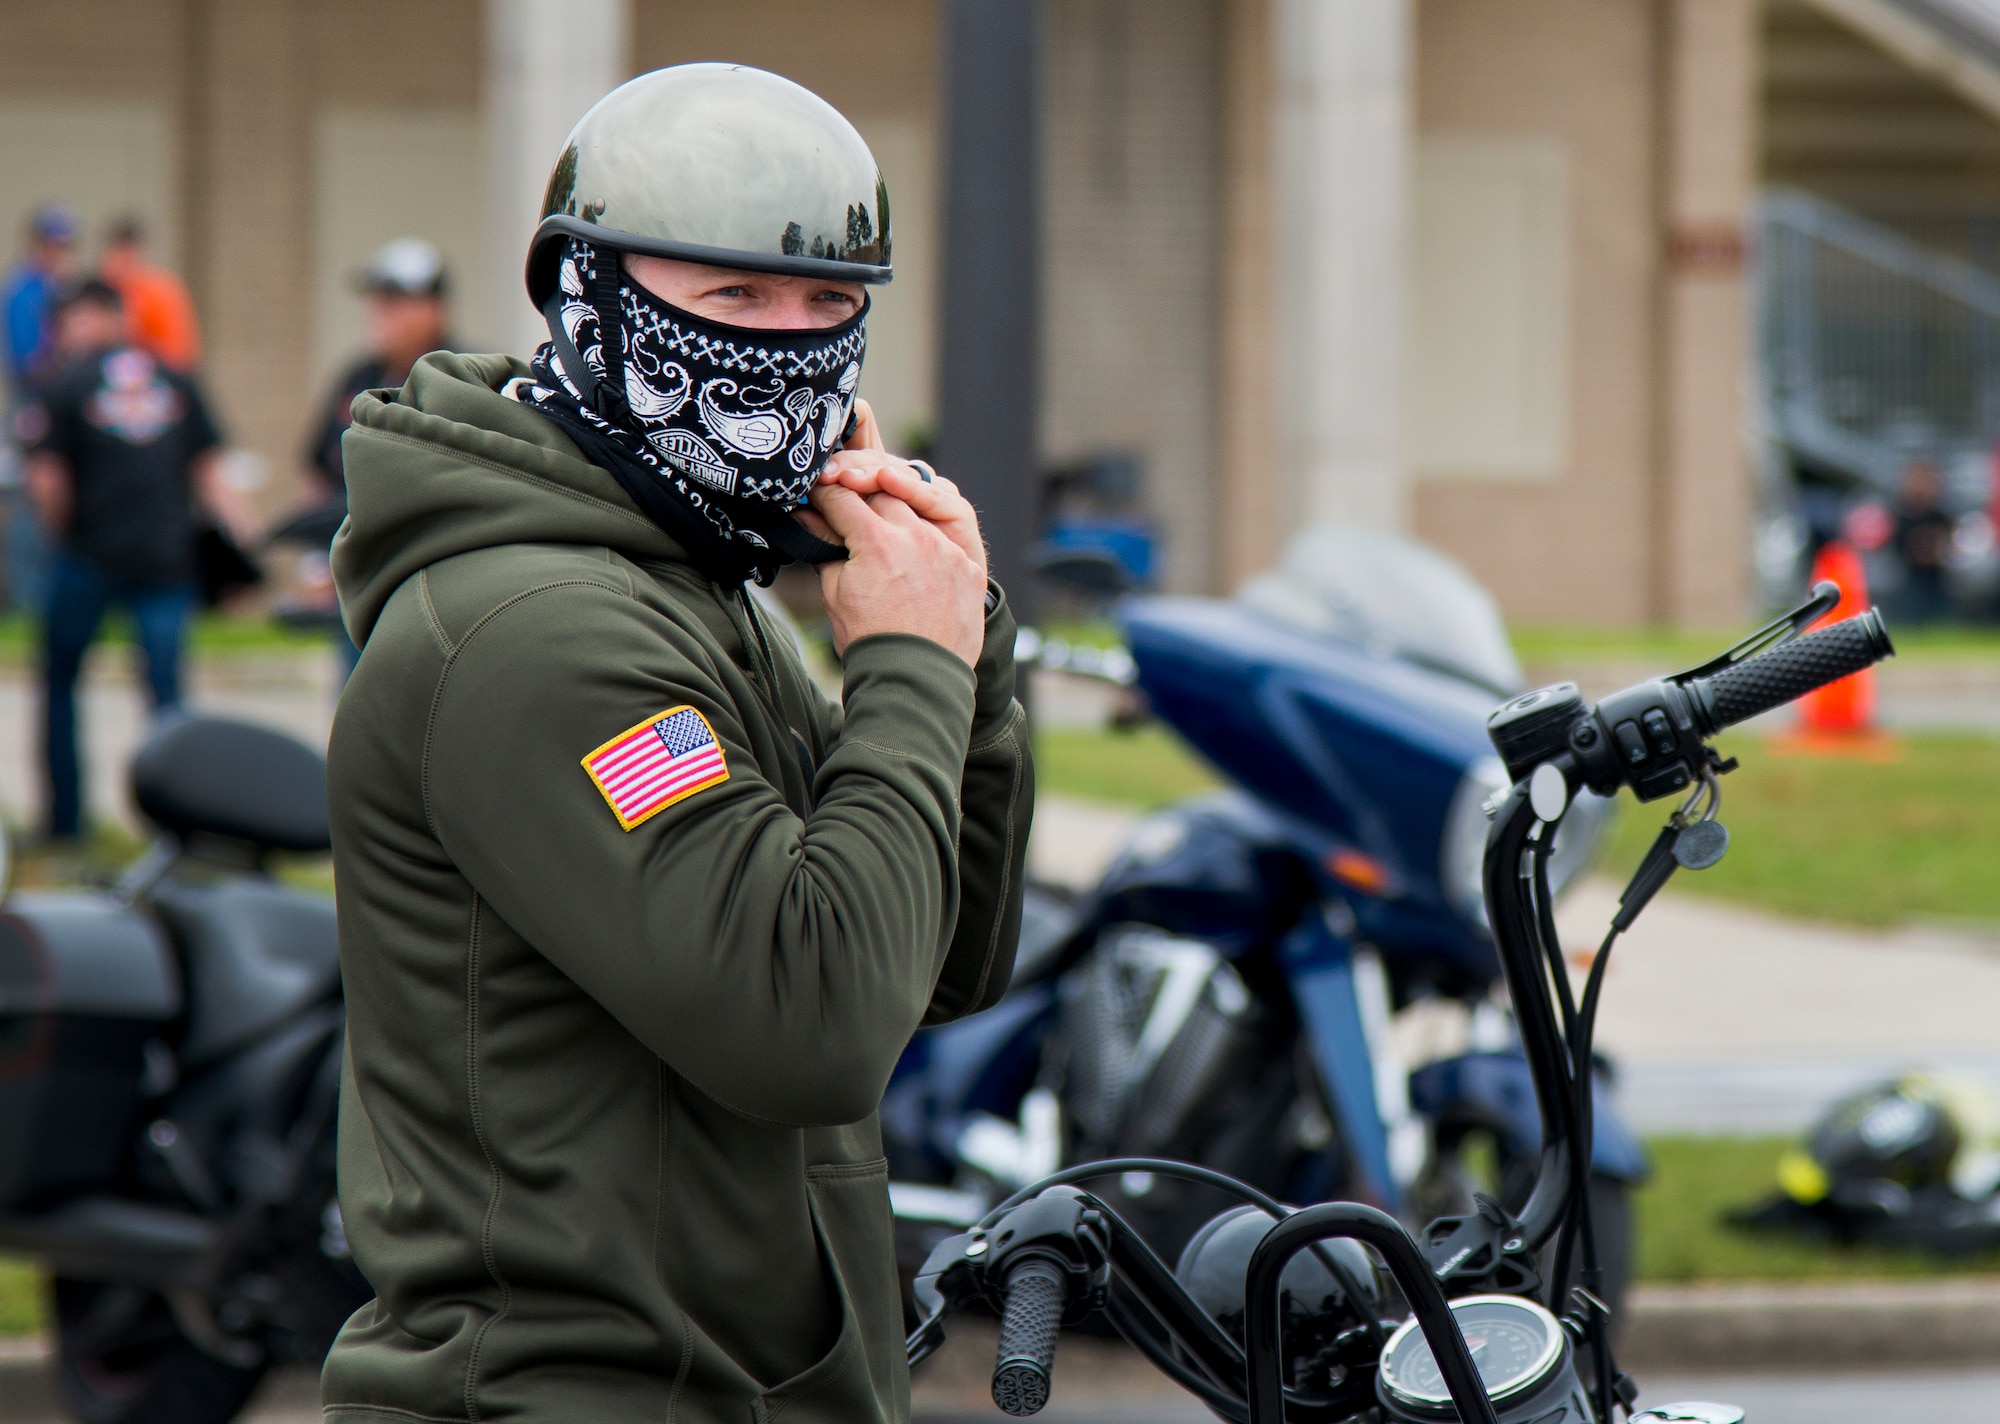 A biker gears up before a ride after the base’s annual motorcycle safety rally April 15 at Eglin Air Force Base, Fla.  More than 500 civilian and military riders rode in for the joint 53rd Wing/96th Test Wing event. (U.S. Air Force photo/Samuel King Jr.)